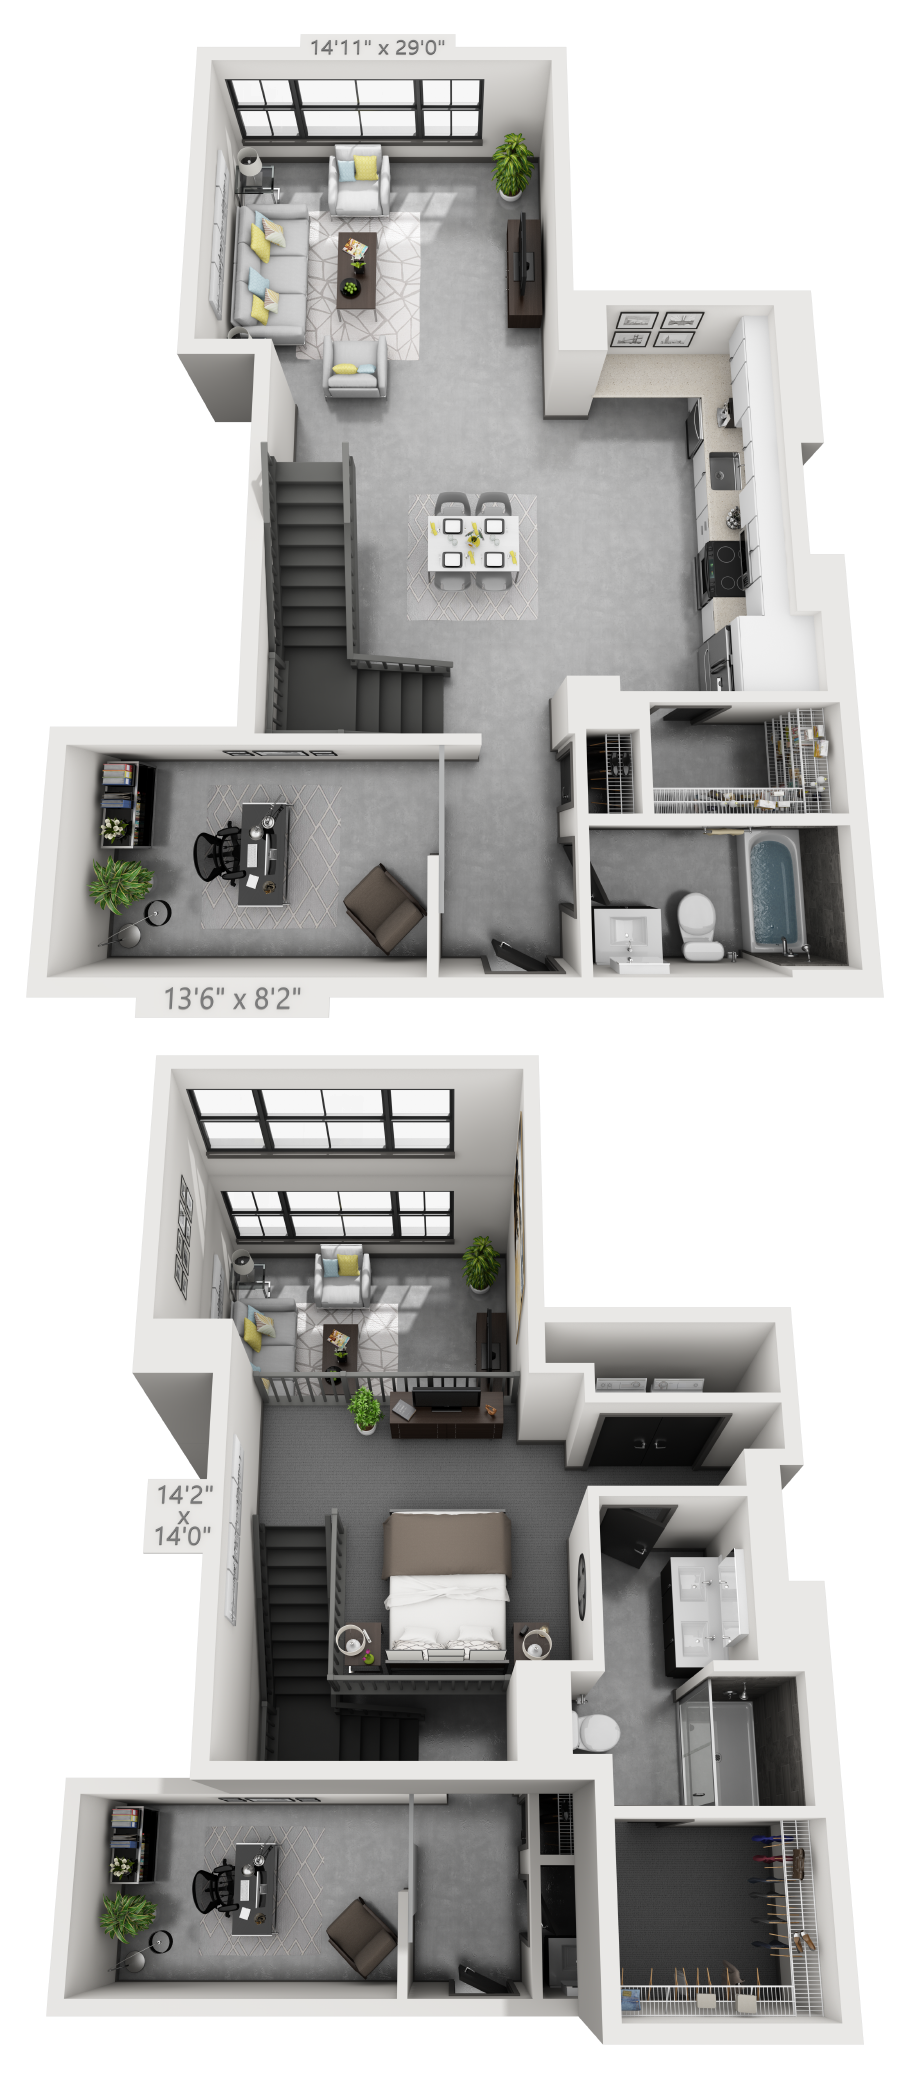 B9M plan is 2 bed, 2 bath and 1,336 square feet